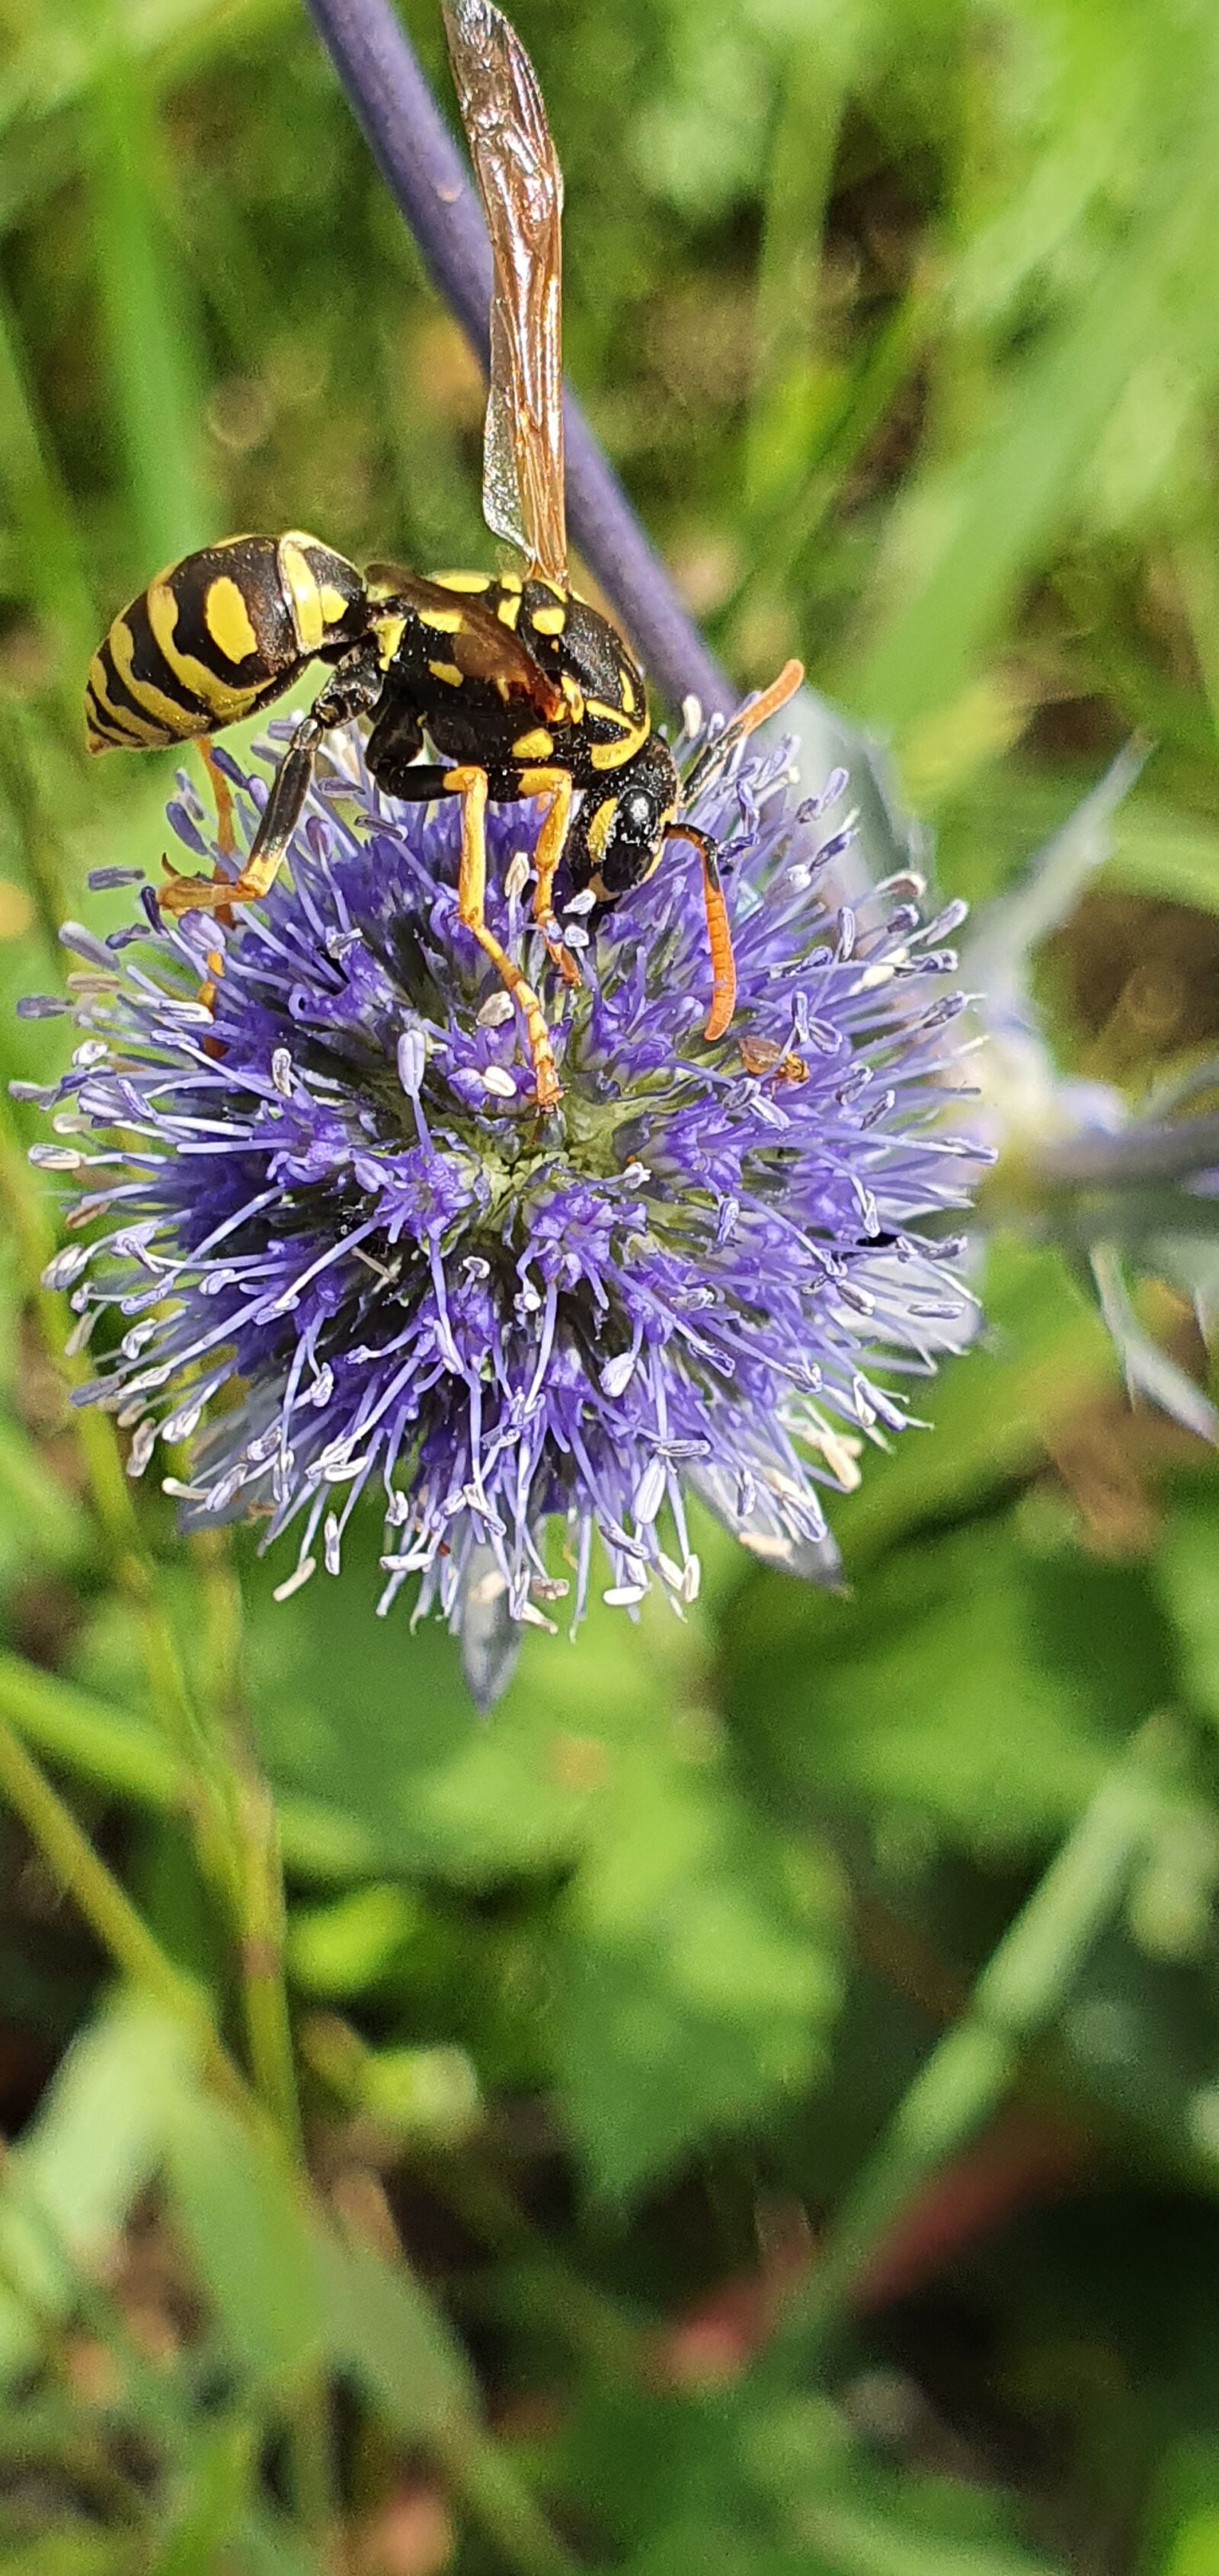 Samsung Galaxy S10+ sample photo. Field wasp, insect, nature photography